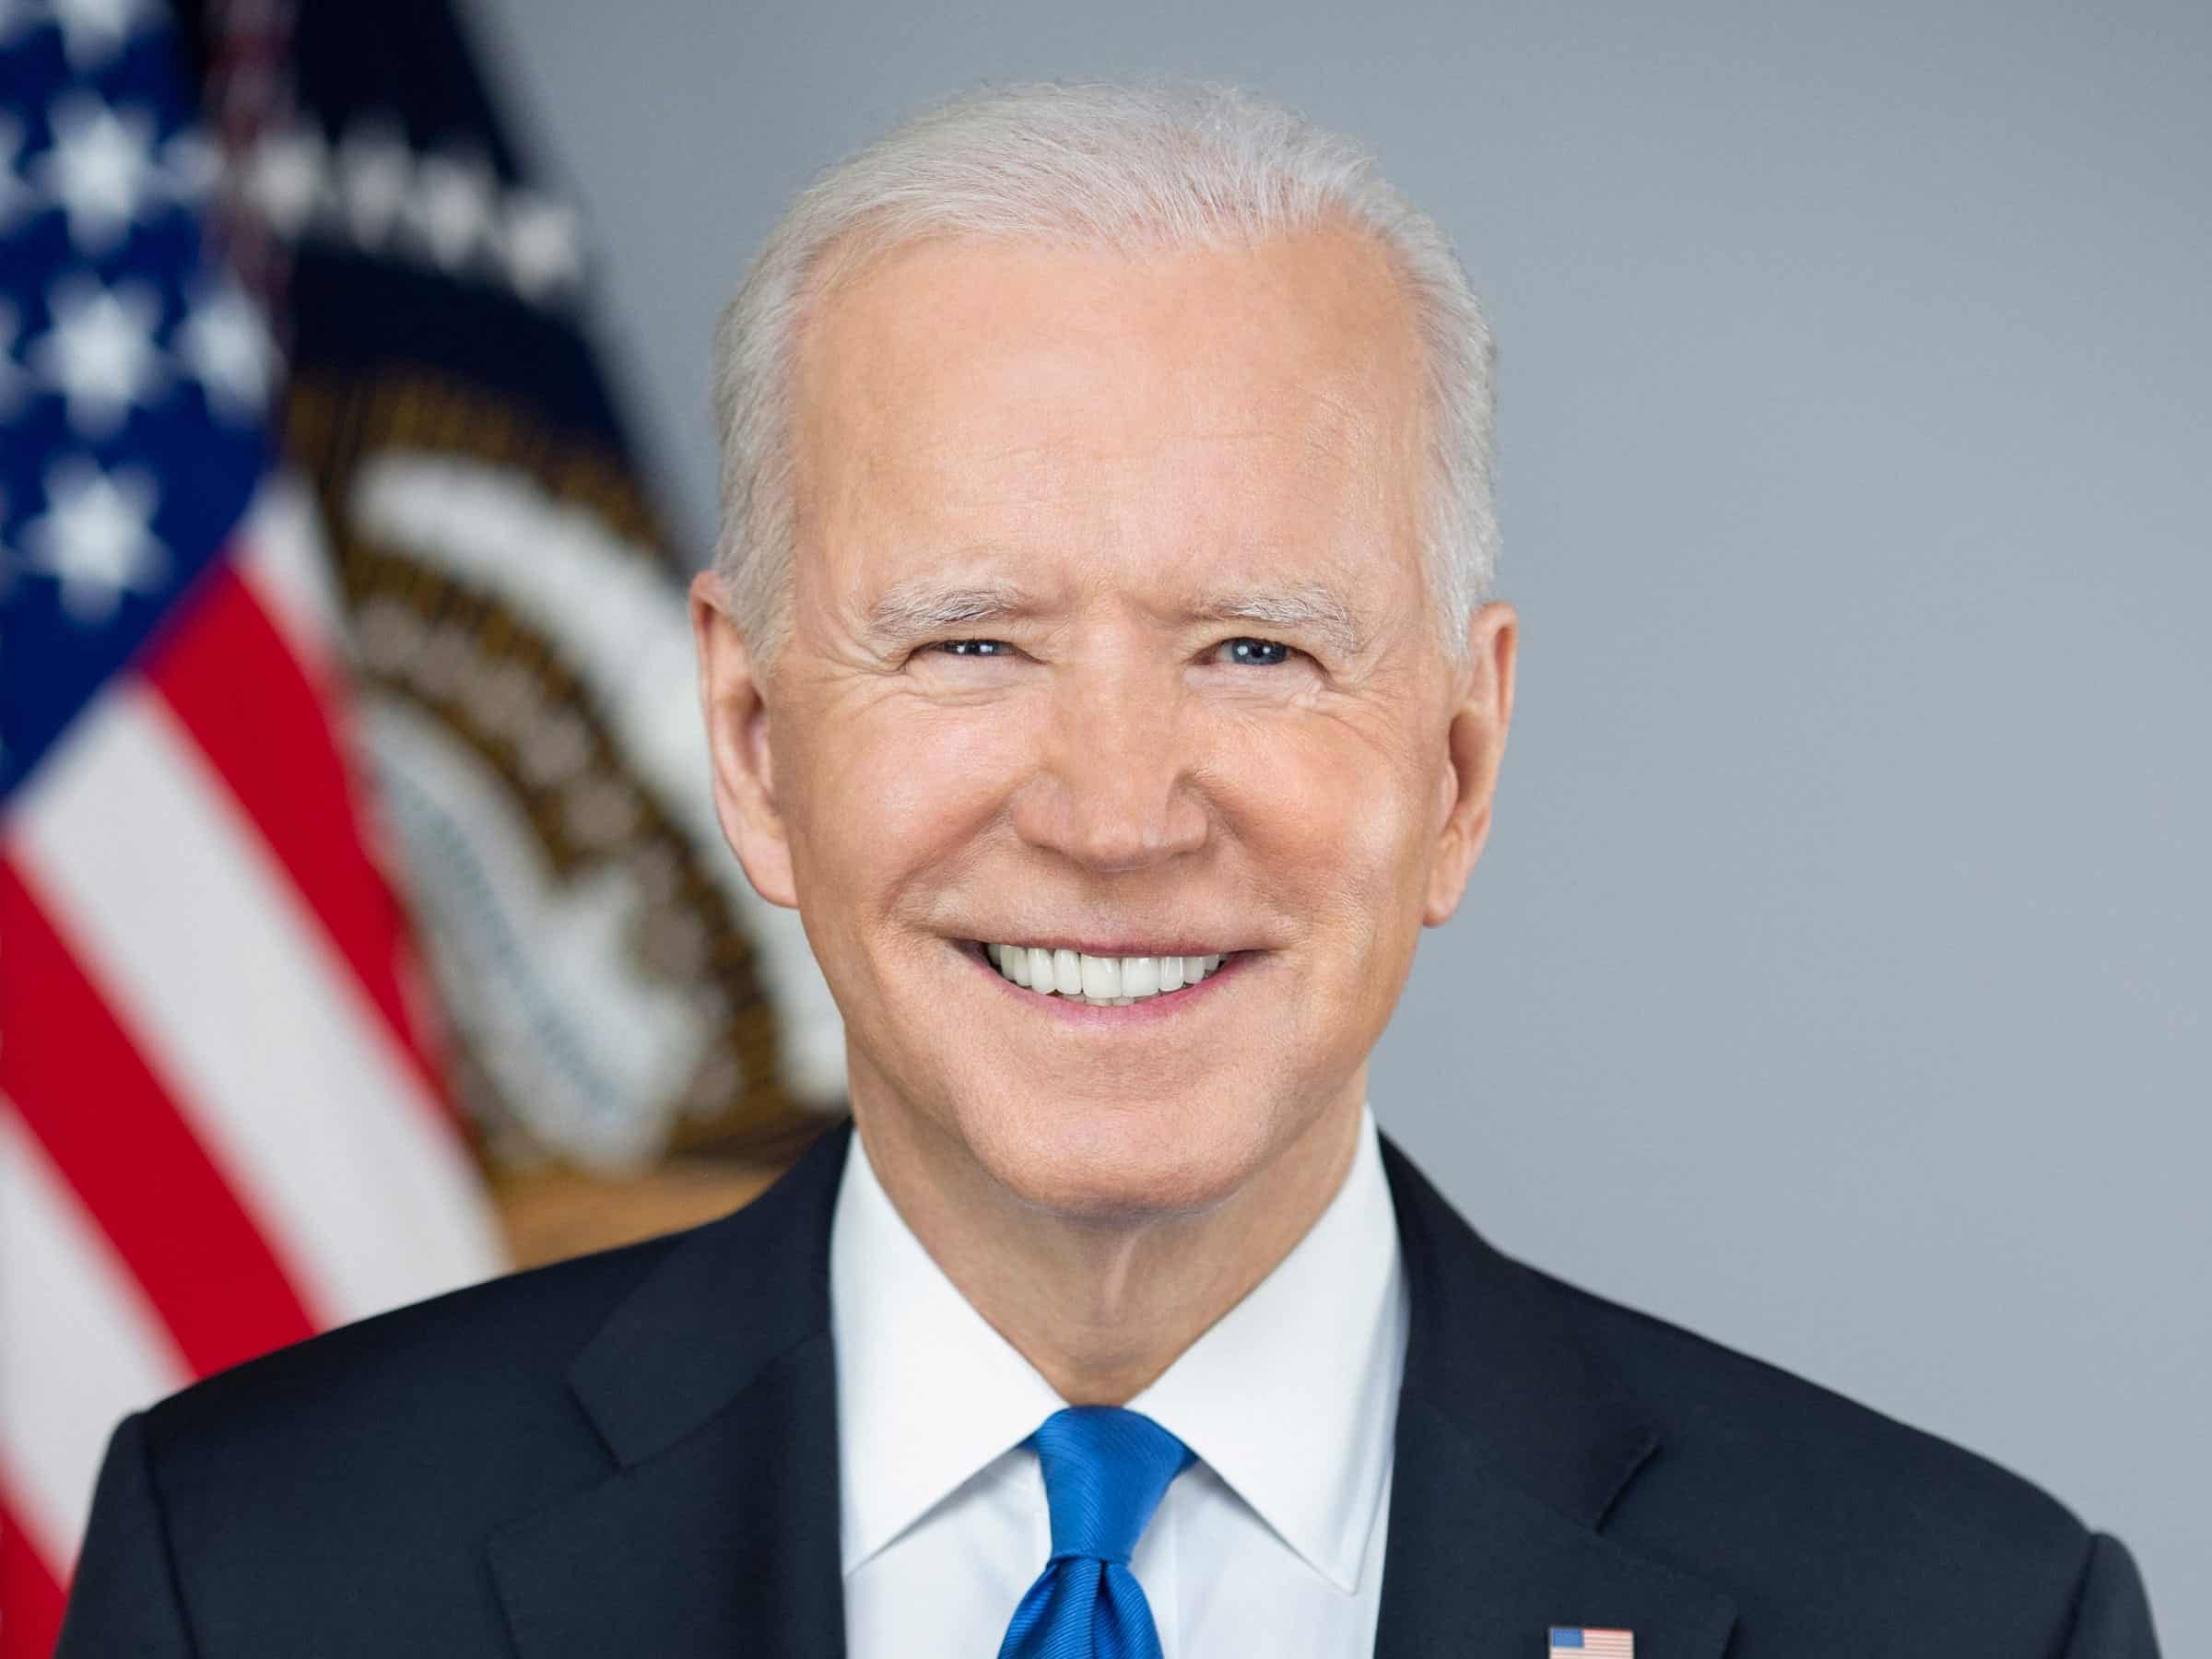 President Biden to Issue an Executive Order on Crypto Next Week (Report)